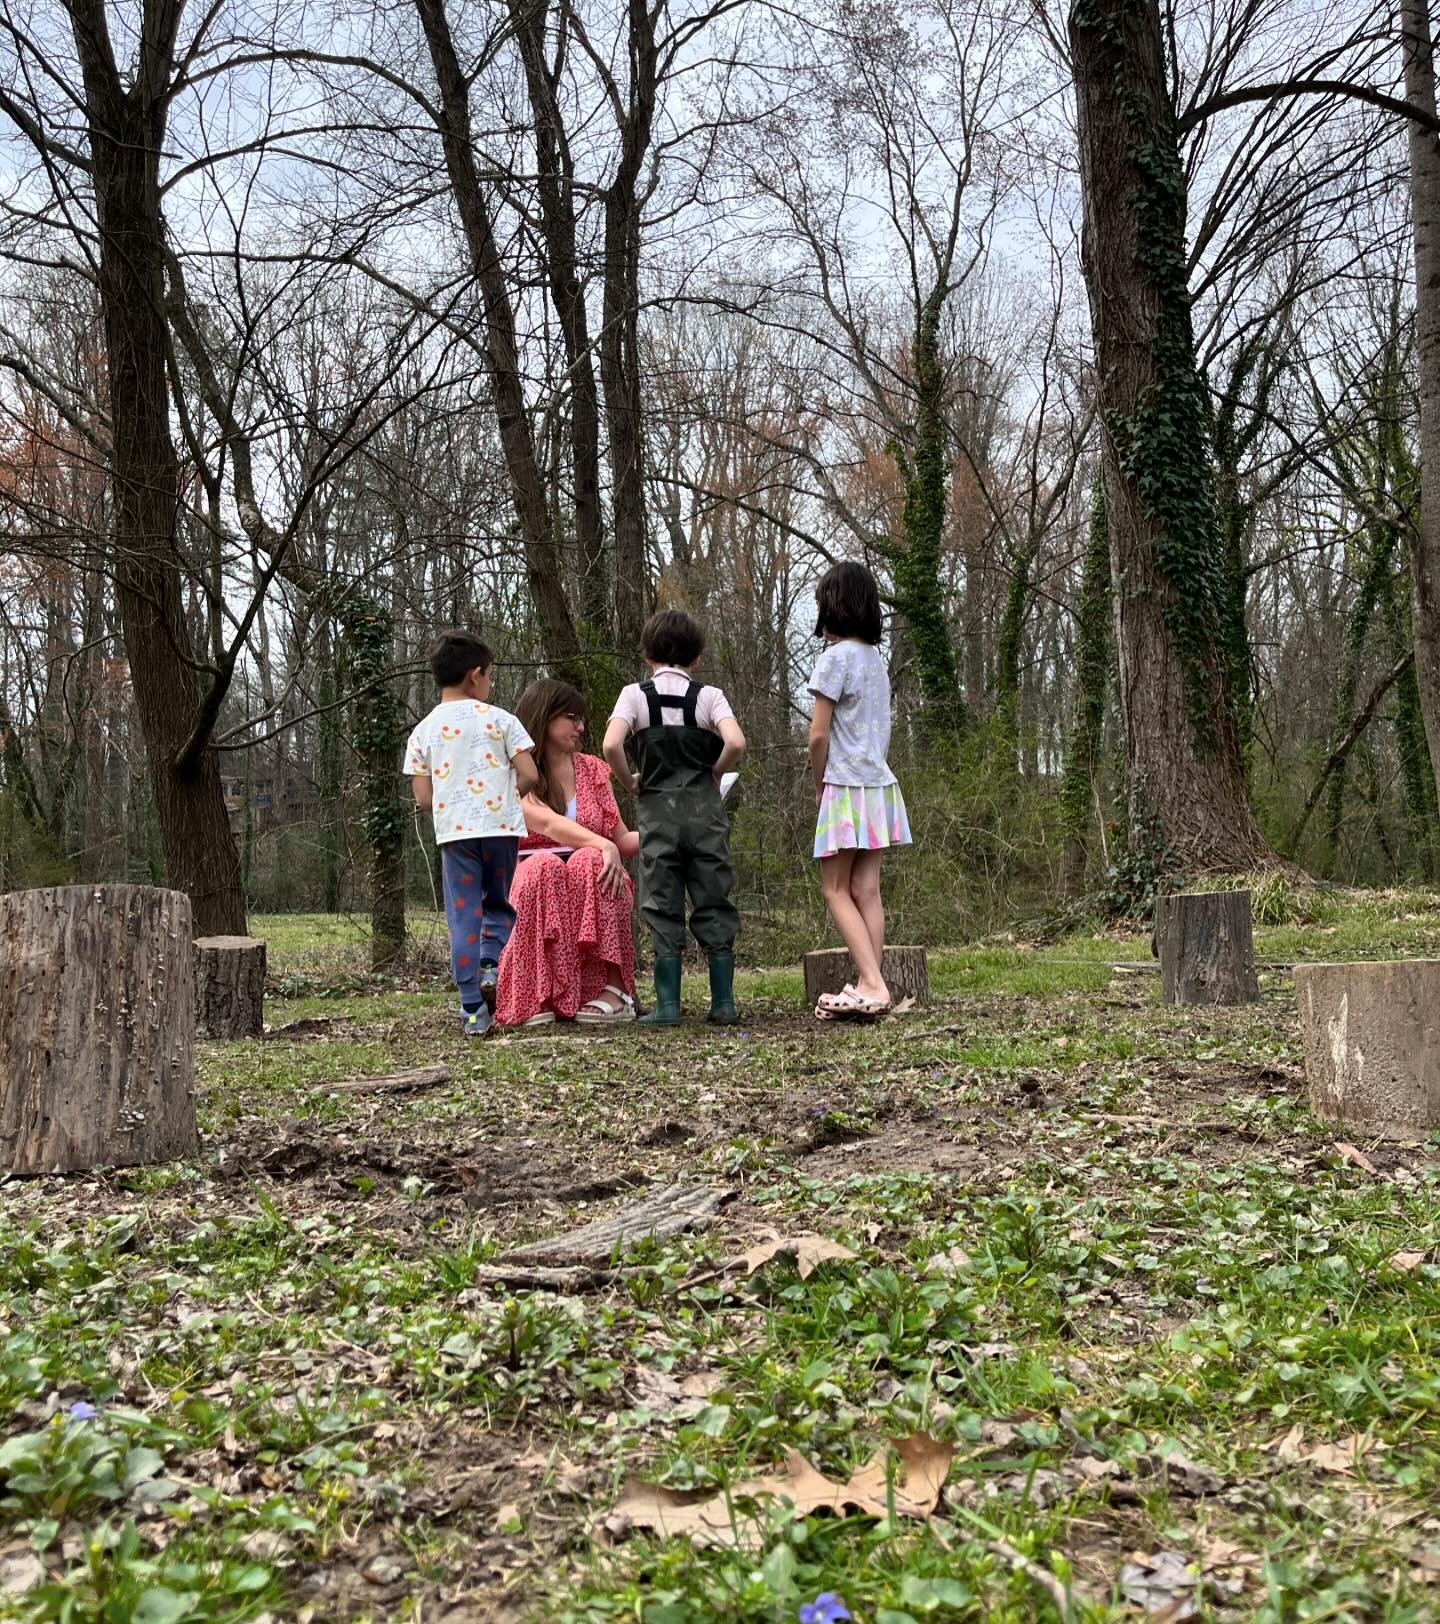 Language Arts class in the fairy circle, creek play, and color pops in the student garden. These are a few of our favorite things 🎵

#goldfinchnatureschool #outdoorclassisin #landstewardship #natureschool #staycurious #rva #microschool #environmenta